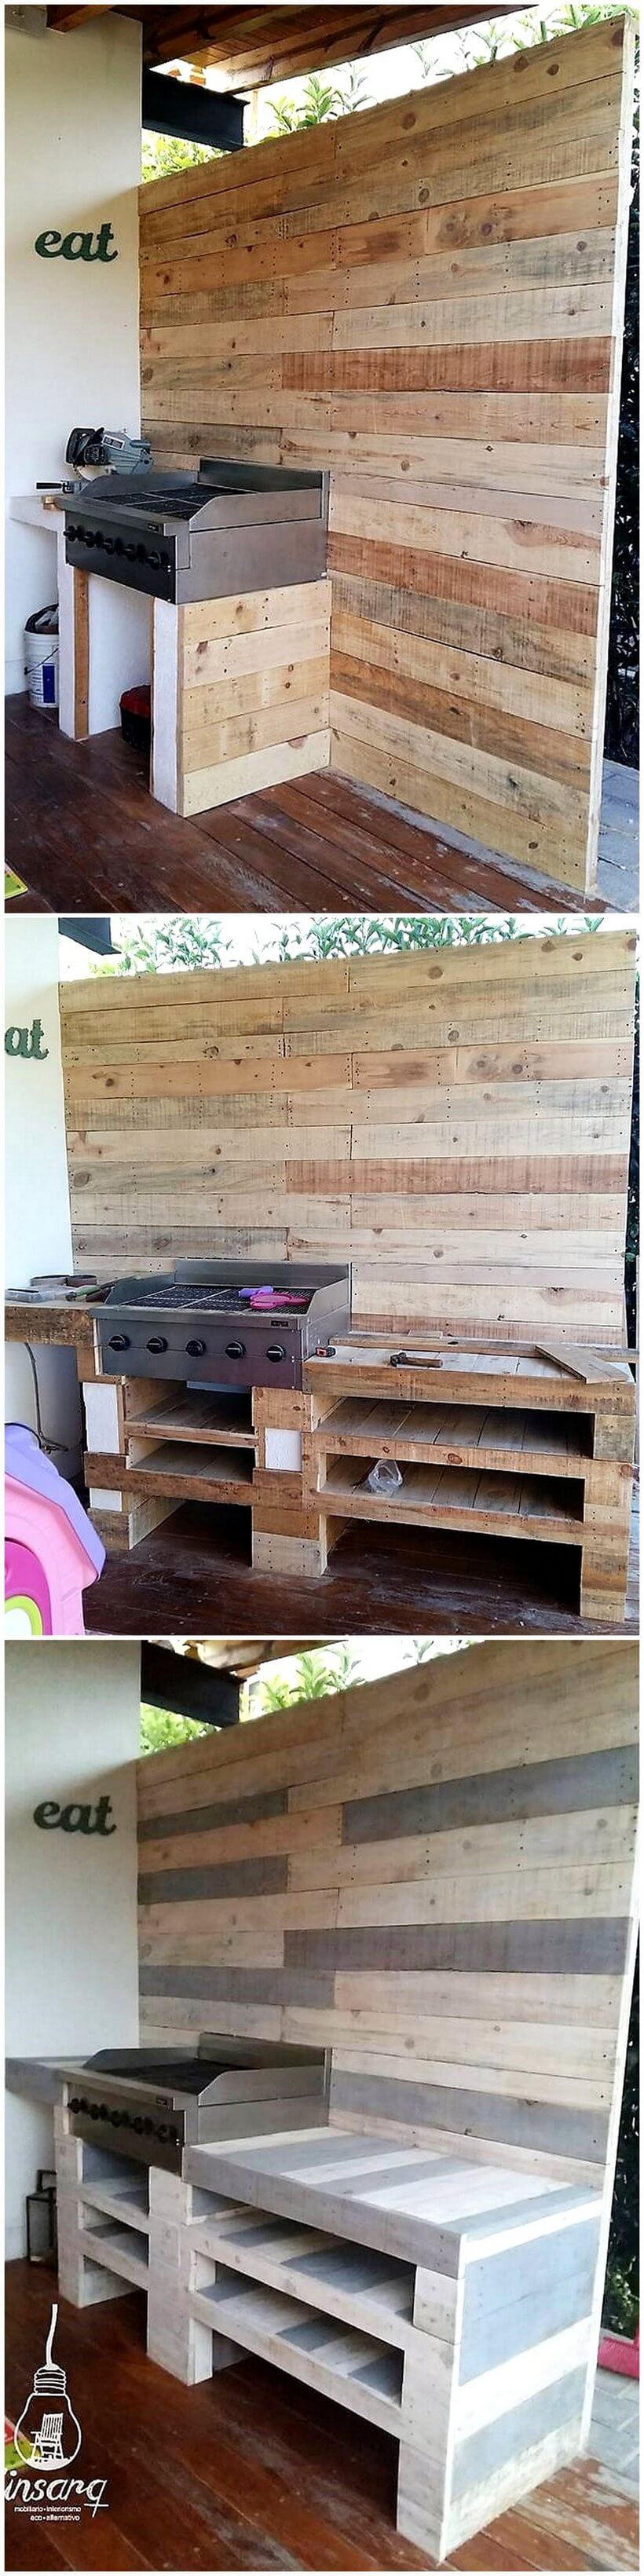 recycled pallet patio kitchen plan